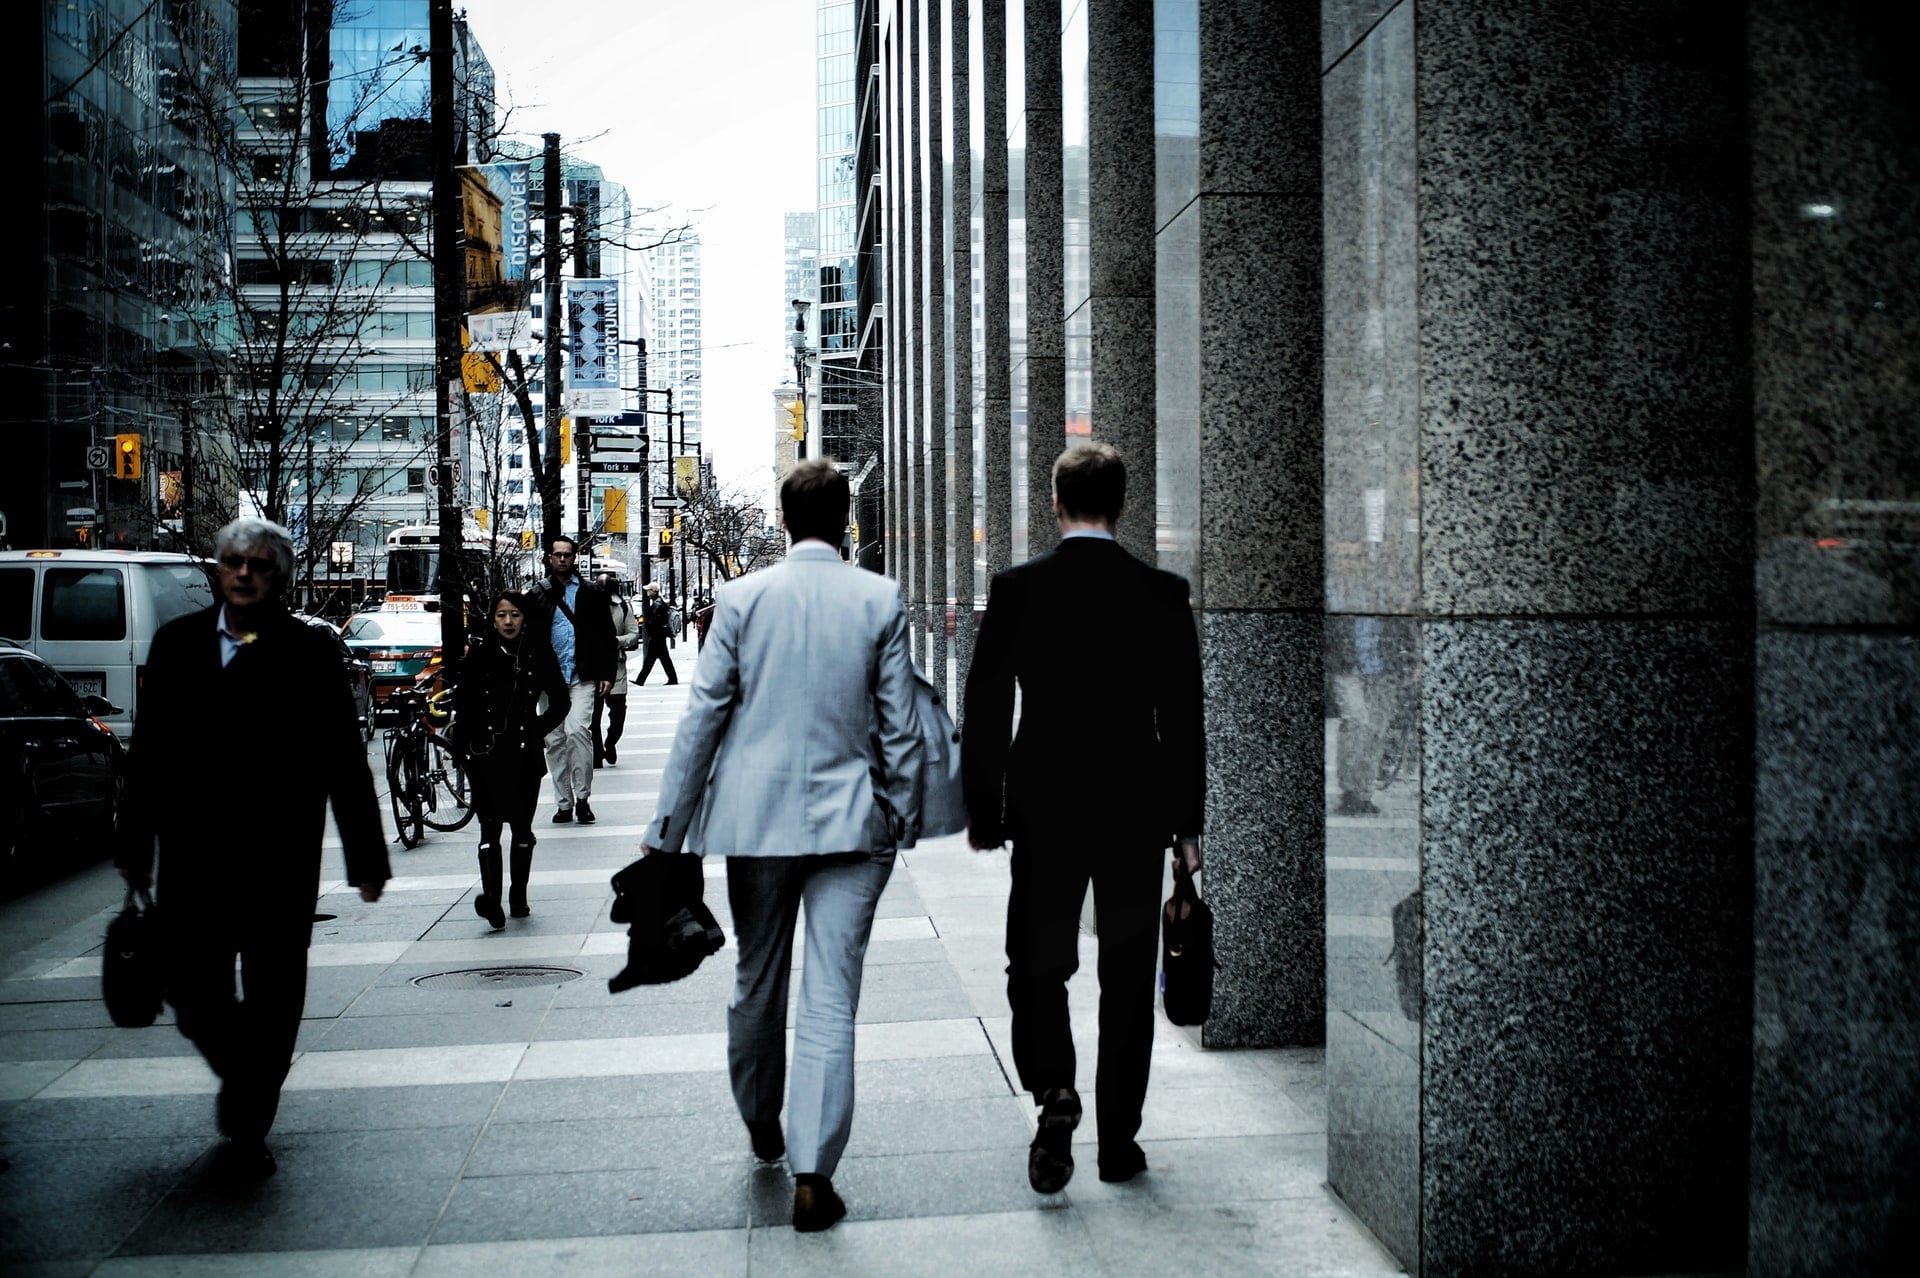 Two men in suits walking on a city street